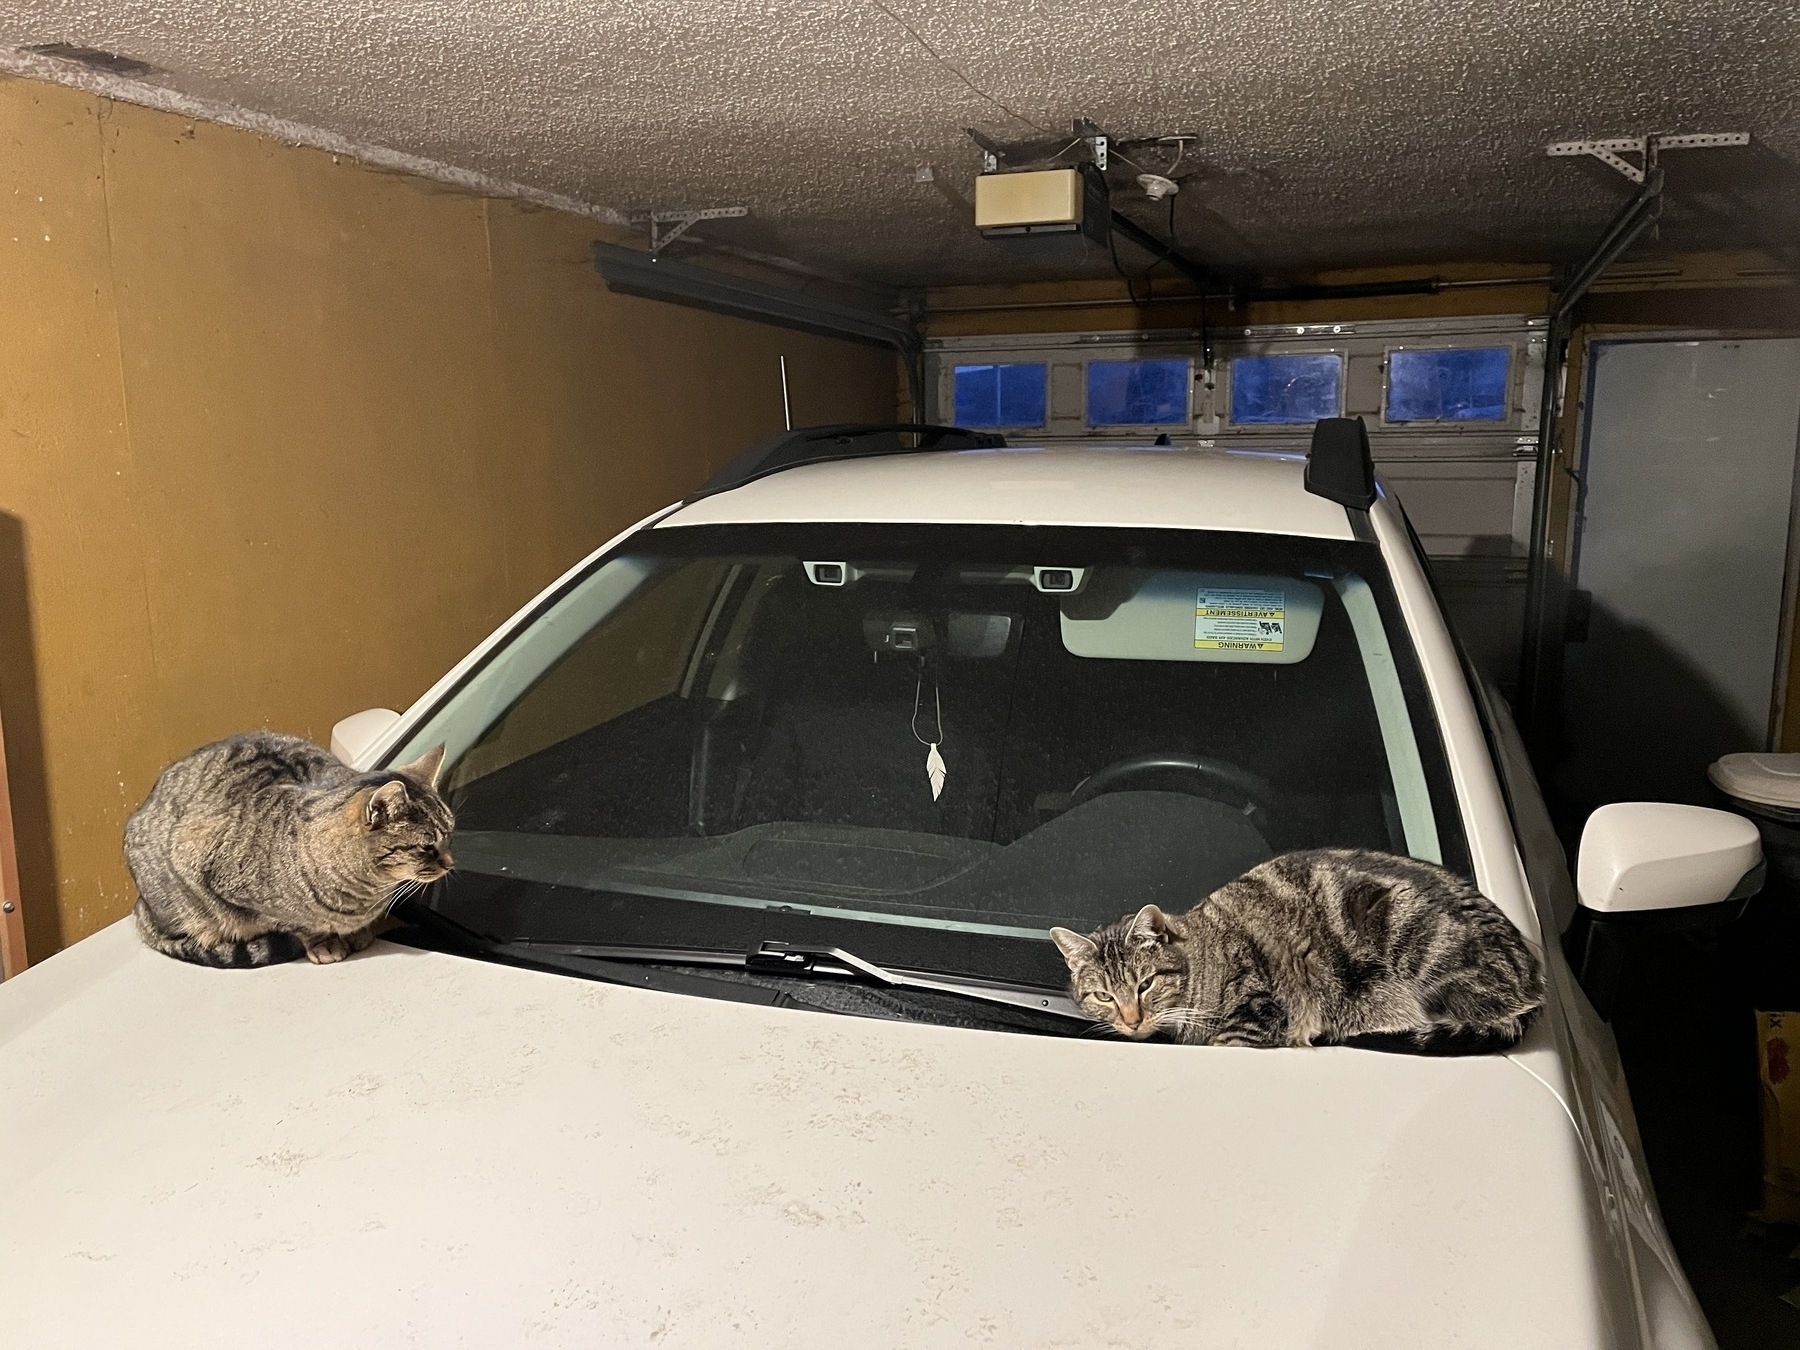 Cats warming themselves on a car hood